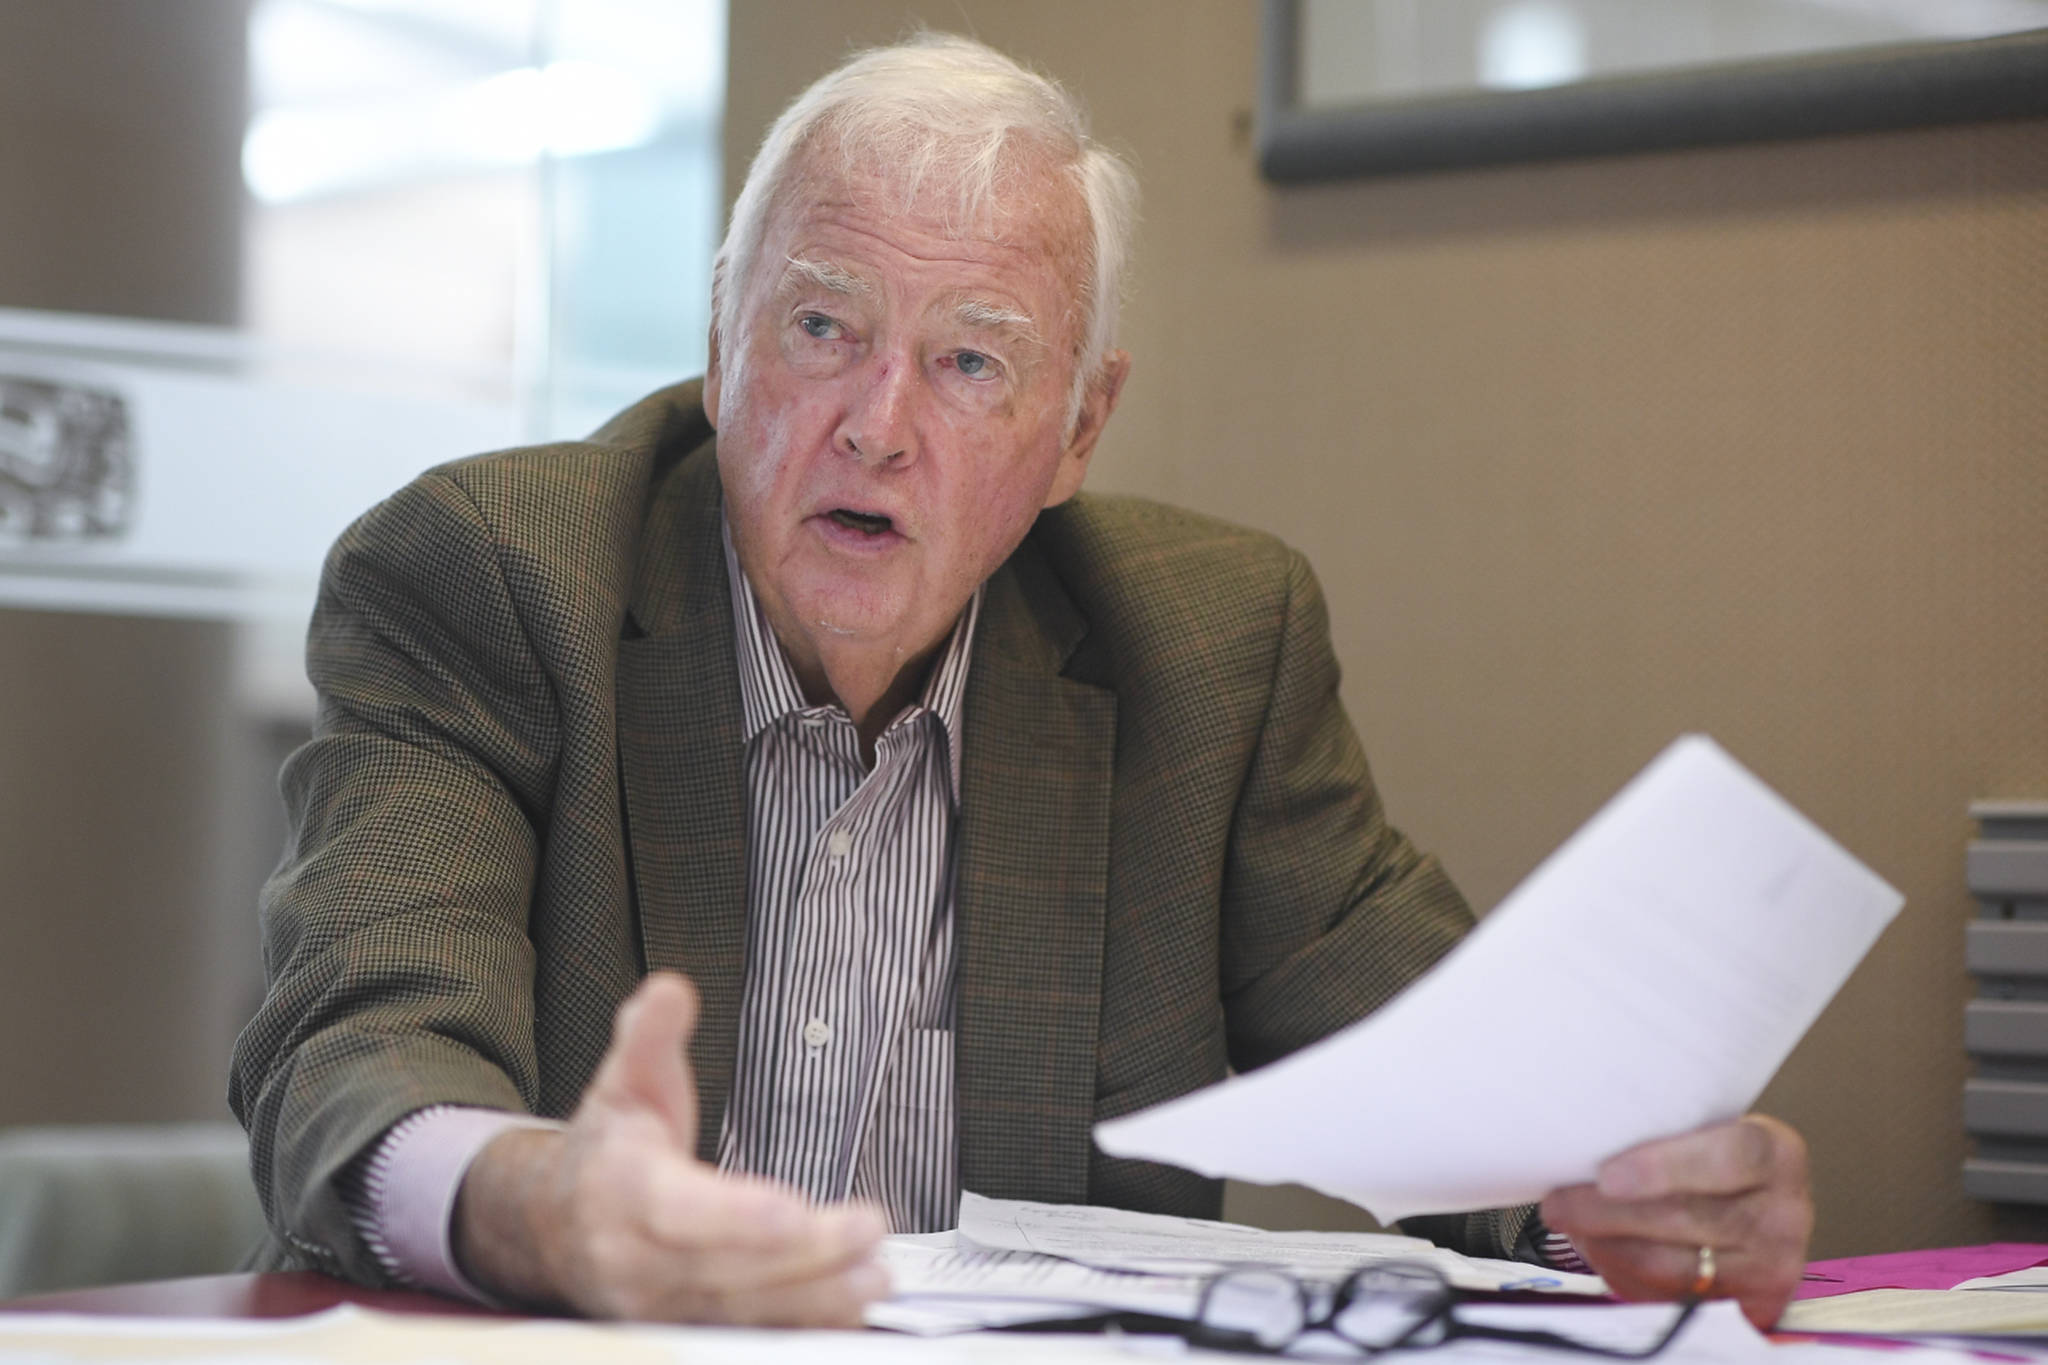 Former Gov. and Sen. Frank Murkowski speaks on a range of subjects during an interview with the Juneau Empire in May 2019. (Michael Penn / Juneau Empire File)